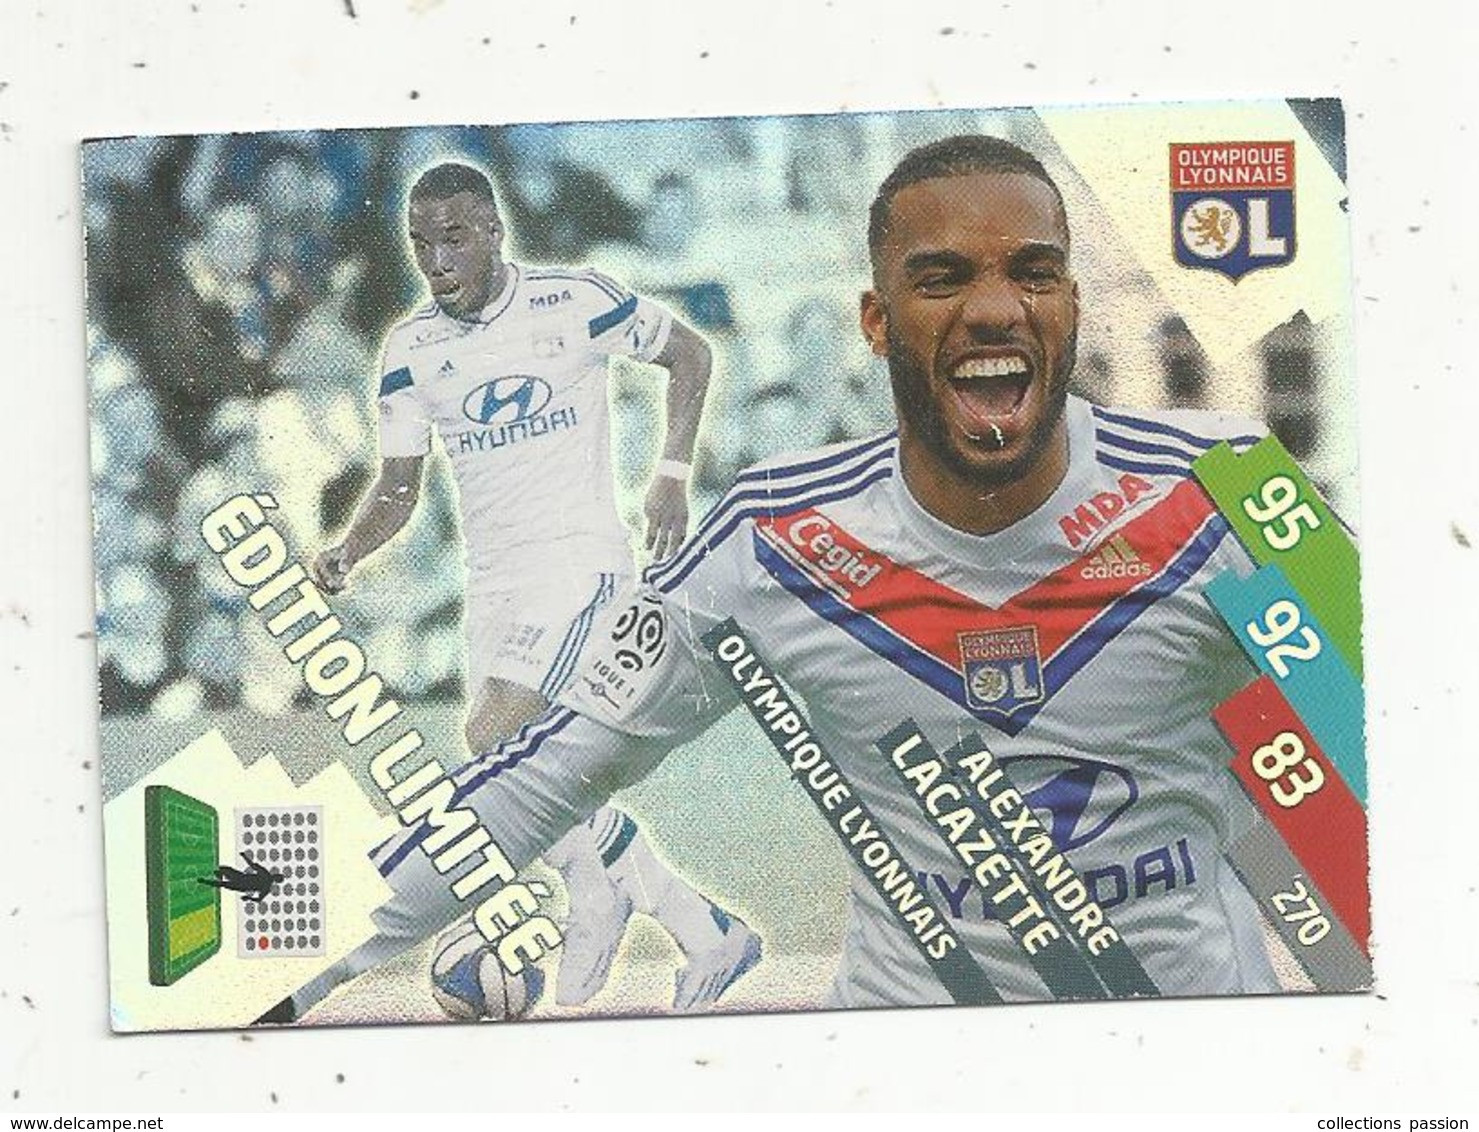 Football , Trading Card , Carte , ADRENALYN XL , 2014-2015 ,PANINI , Alexandre LACAZETTE , 2 Scans - Trading Cards